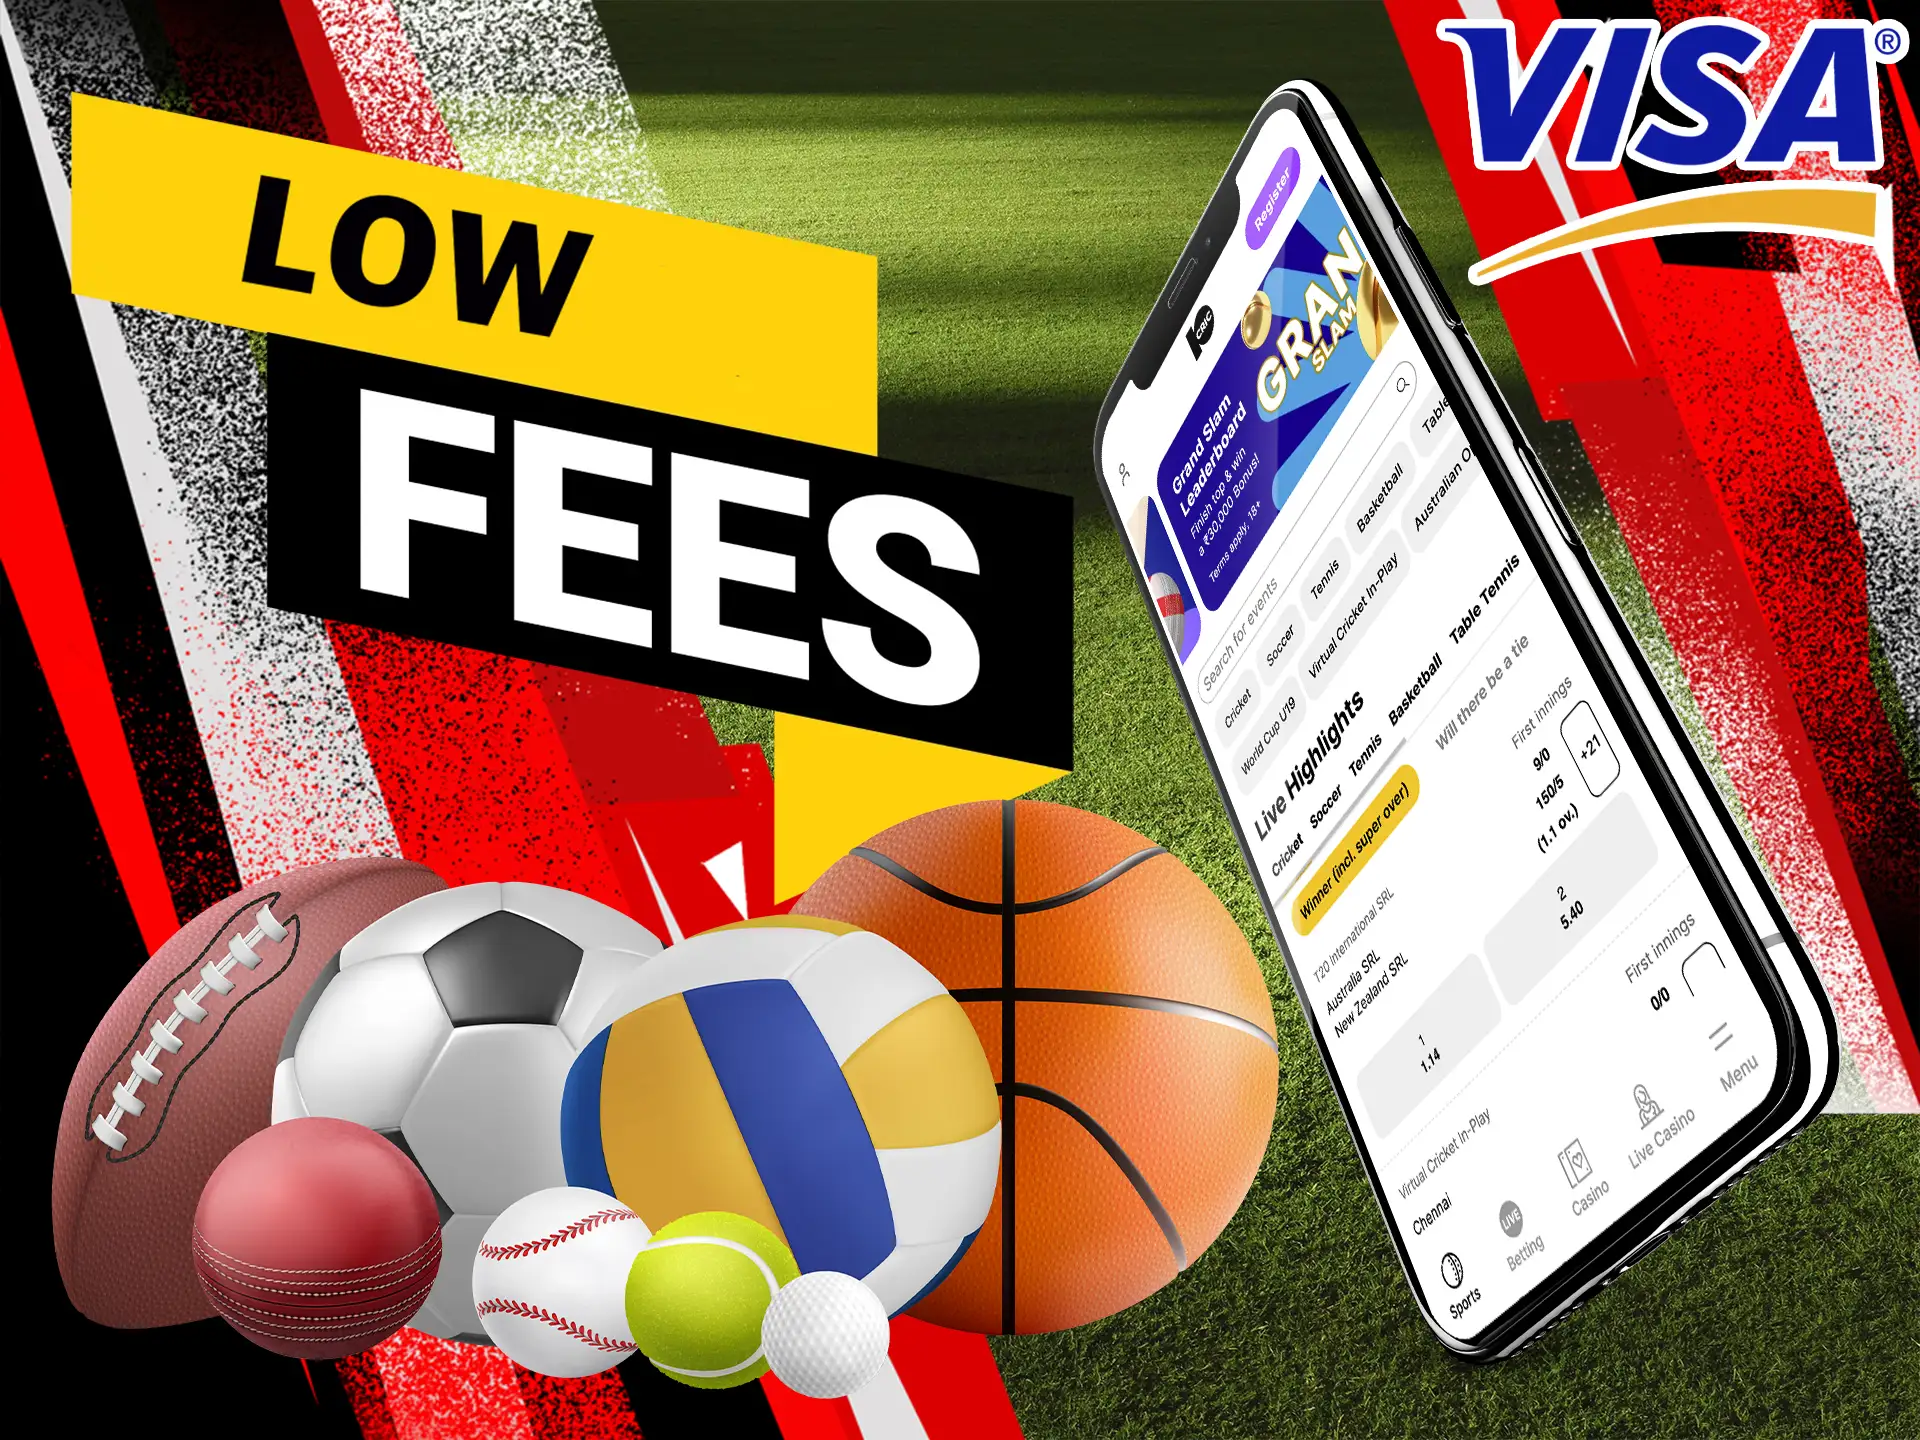 Betting sites in most cases do not charge an additional fee for Visa card top-ups.